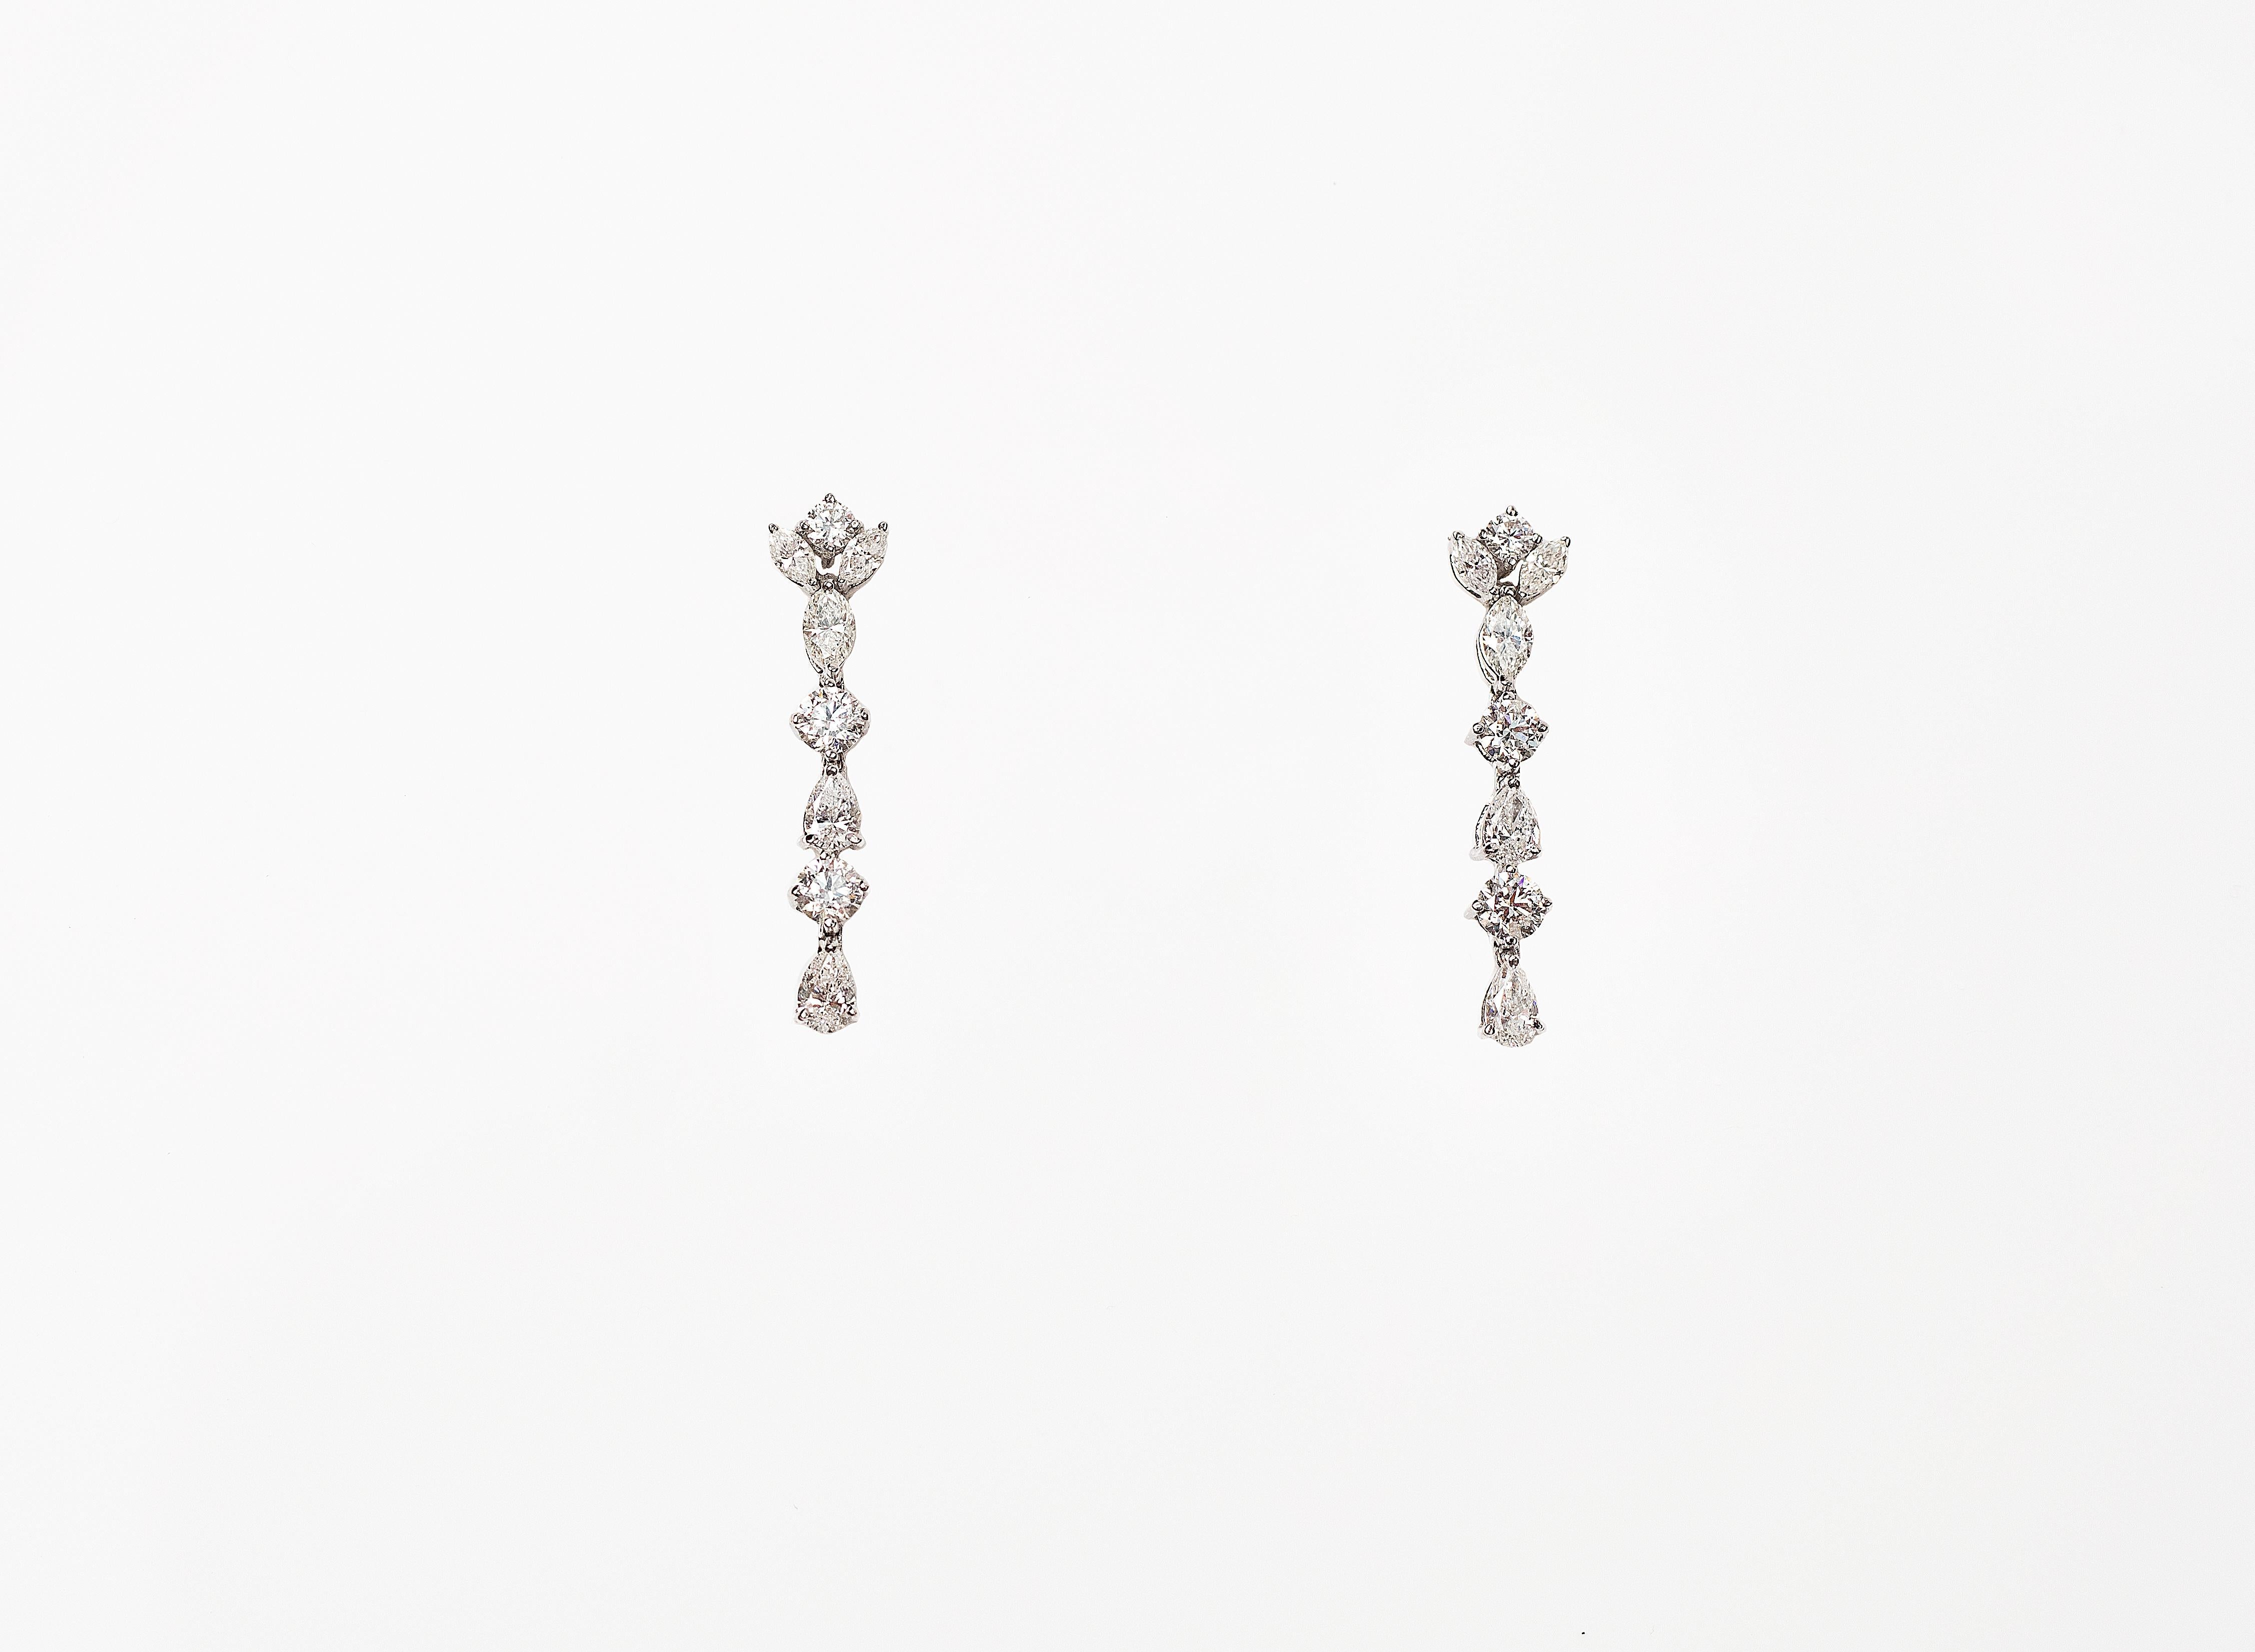 Fancy Shape Diamonds Earrings Handcrafted in 18K Gold
Gold weight - 6.626 gms
Diamond Weight - 4.47 cts
Diamond Clarity - VS-Si
Colour - G
Post and Clip System